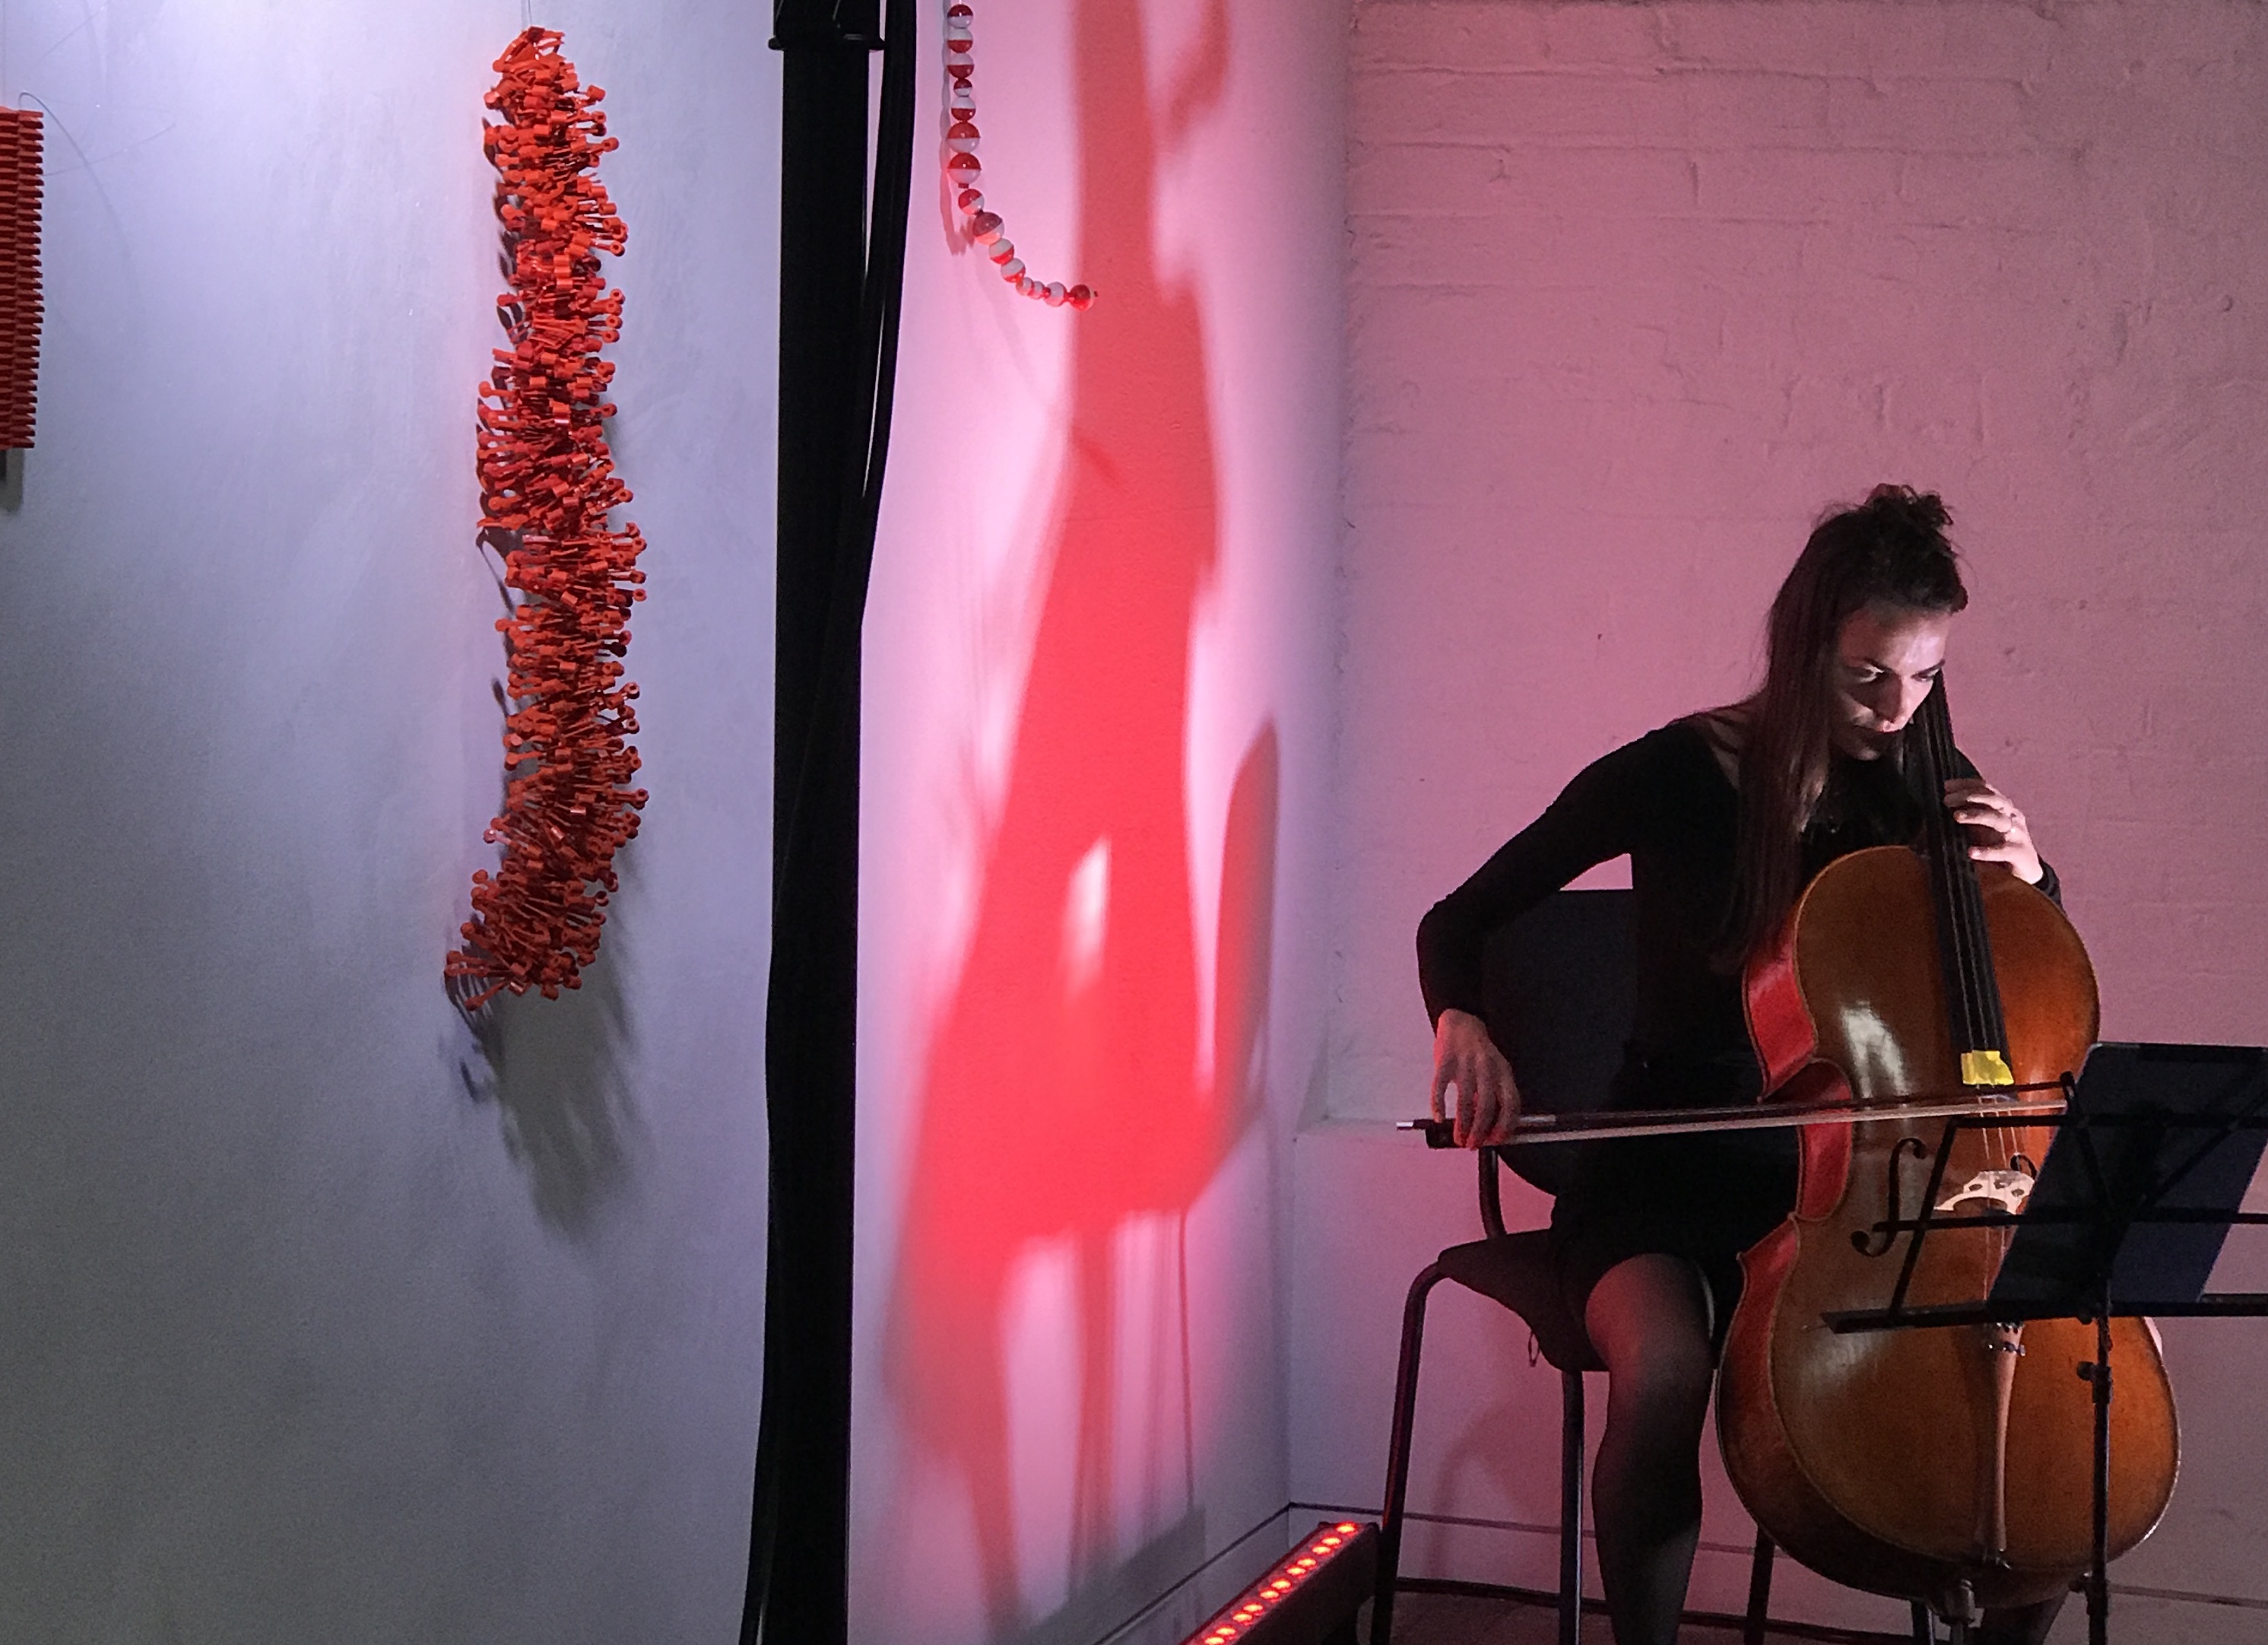 Voices Cello Red wall 2020